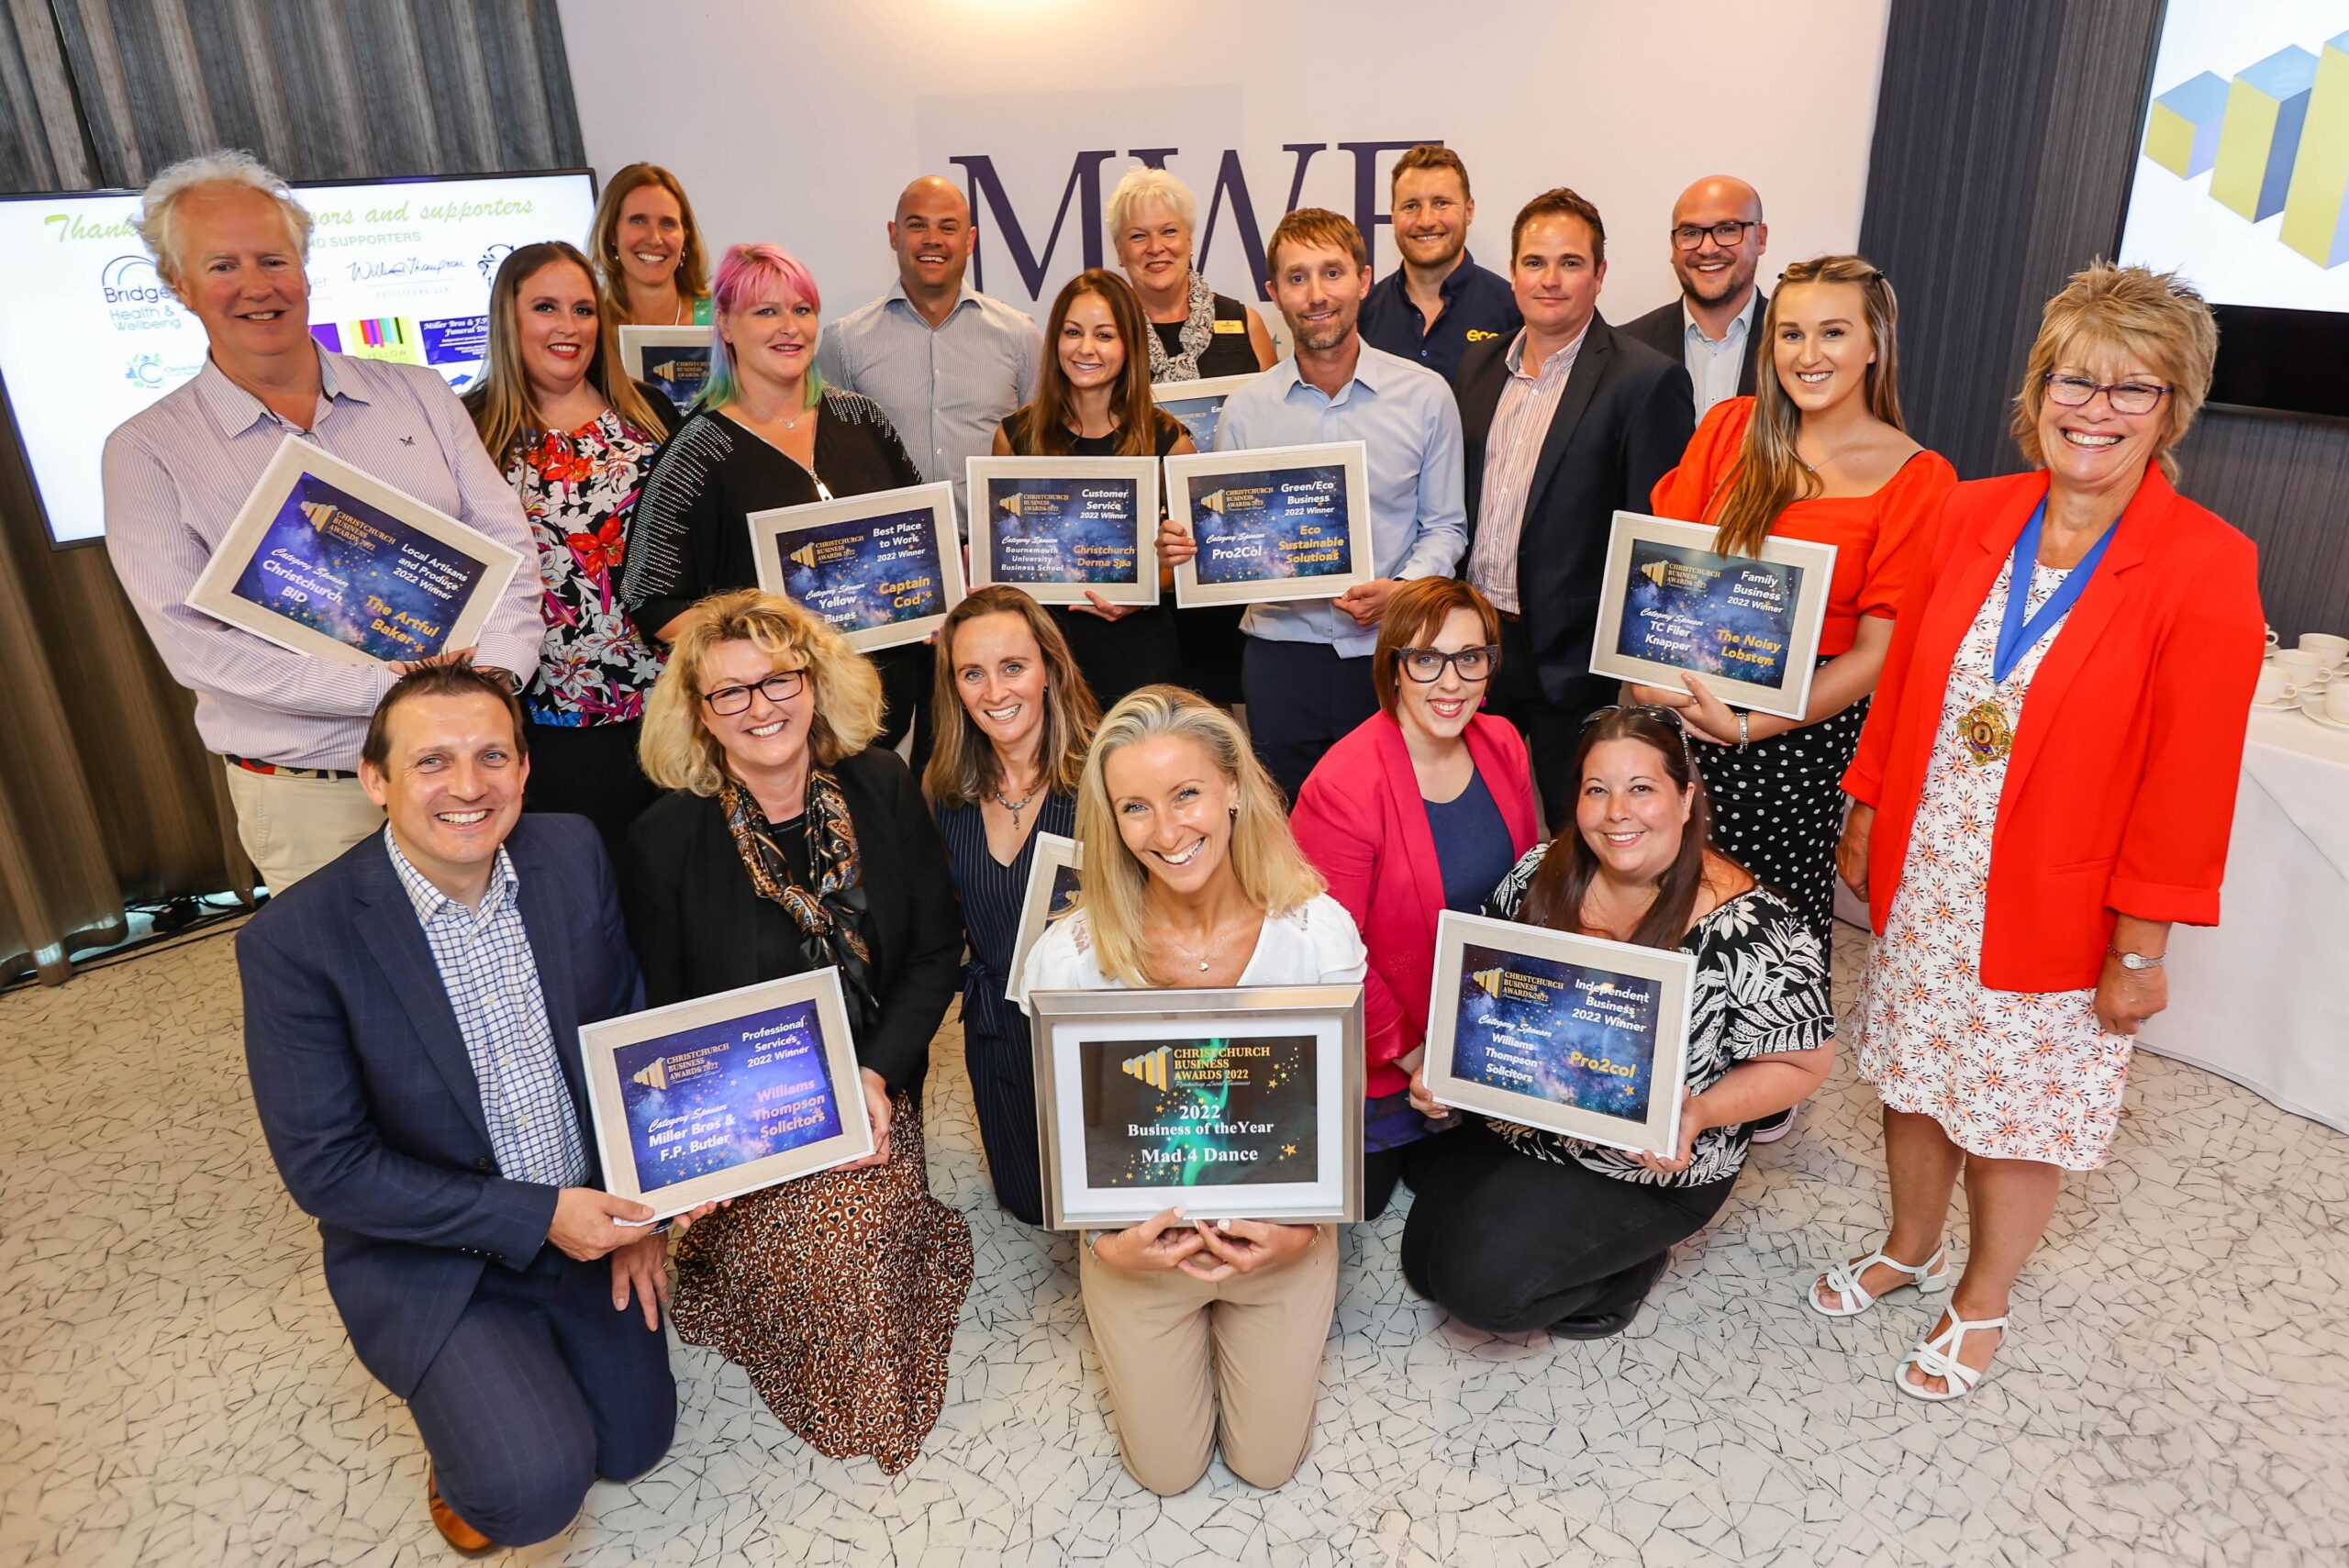 Winners of the Christchurch Business Awards